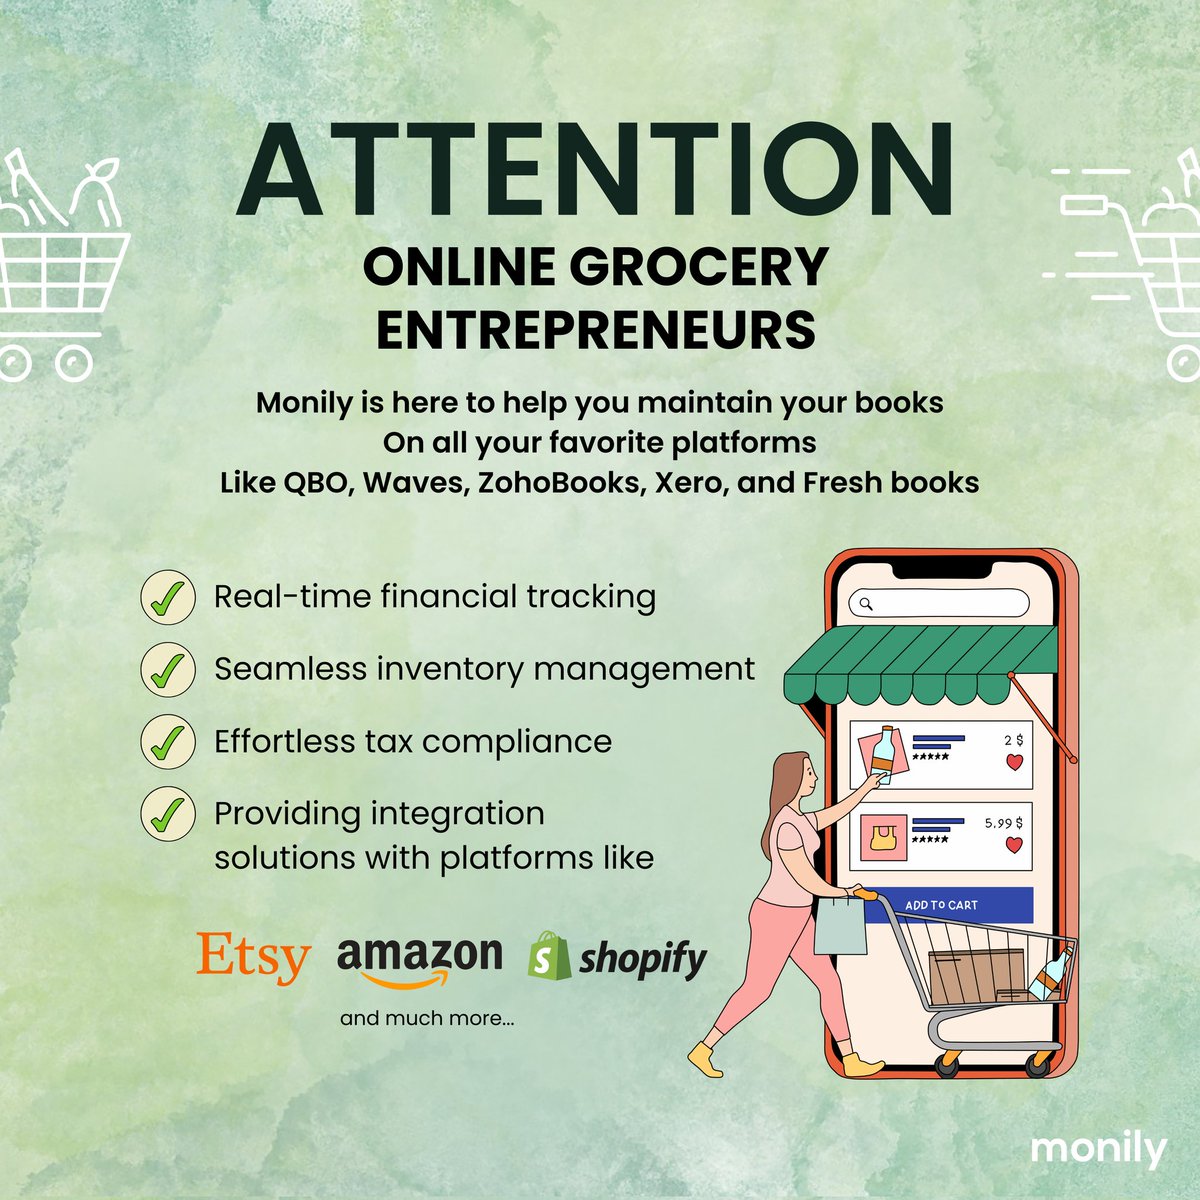 Have the Monday blues hit yet? Make managing your e-commerce grocery business a breeze with our tailored accounting solutions. Have more time to relax and spend less time on the books.

#MondayMotivational #AccountingTips #onlinegroceryshop #monilyaccounting #bookkeeping #cfo